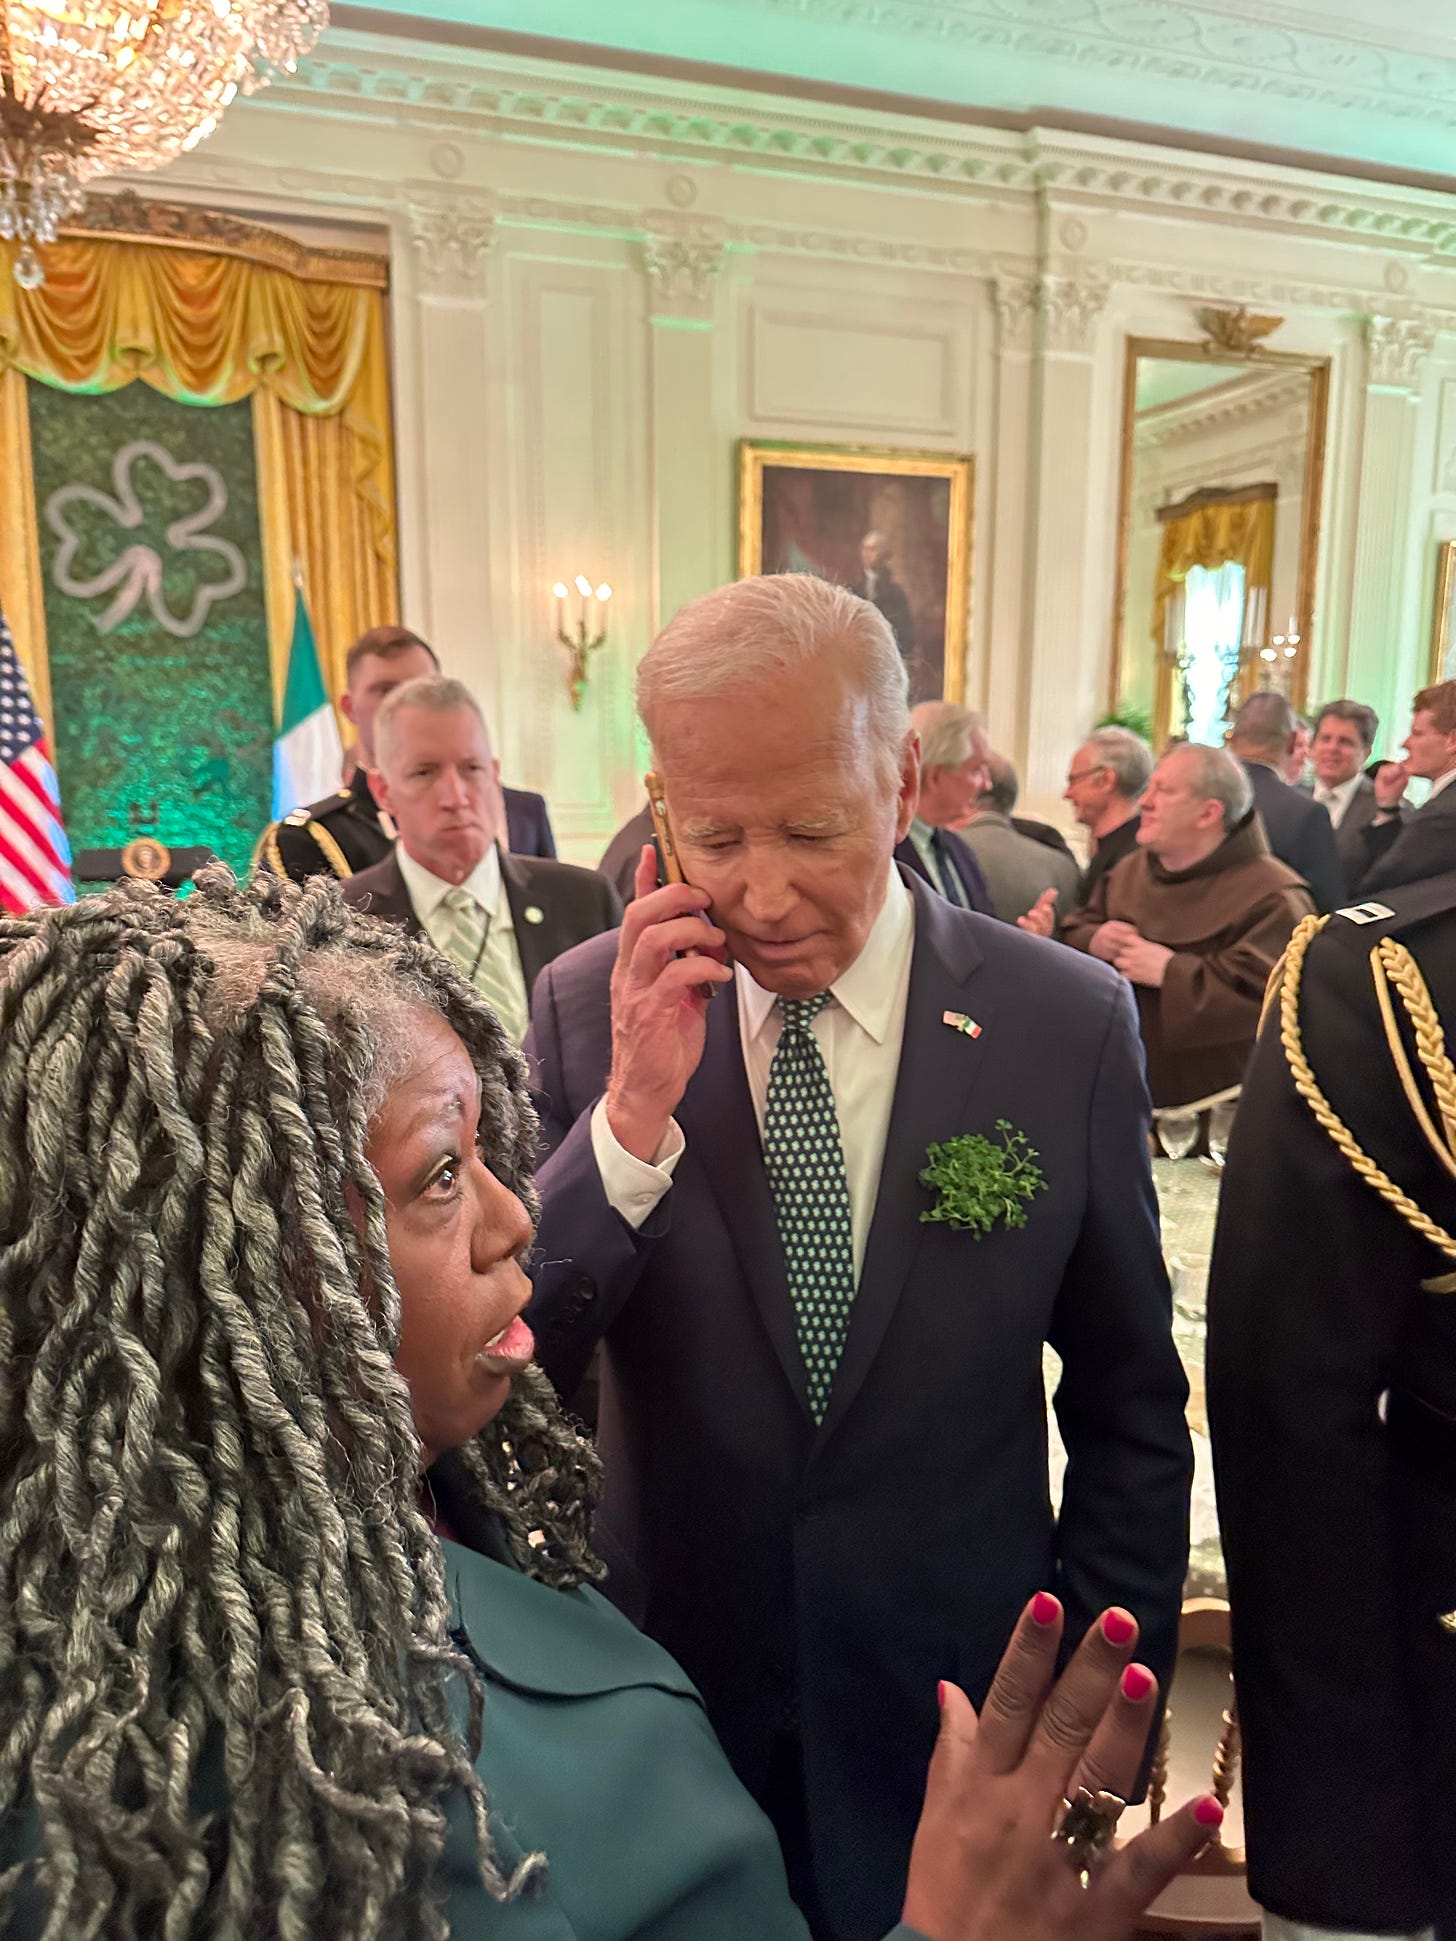 President Biden on a phone speaking with Anthea Butler's mom